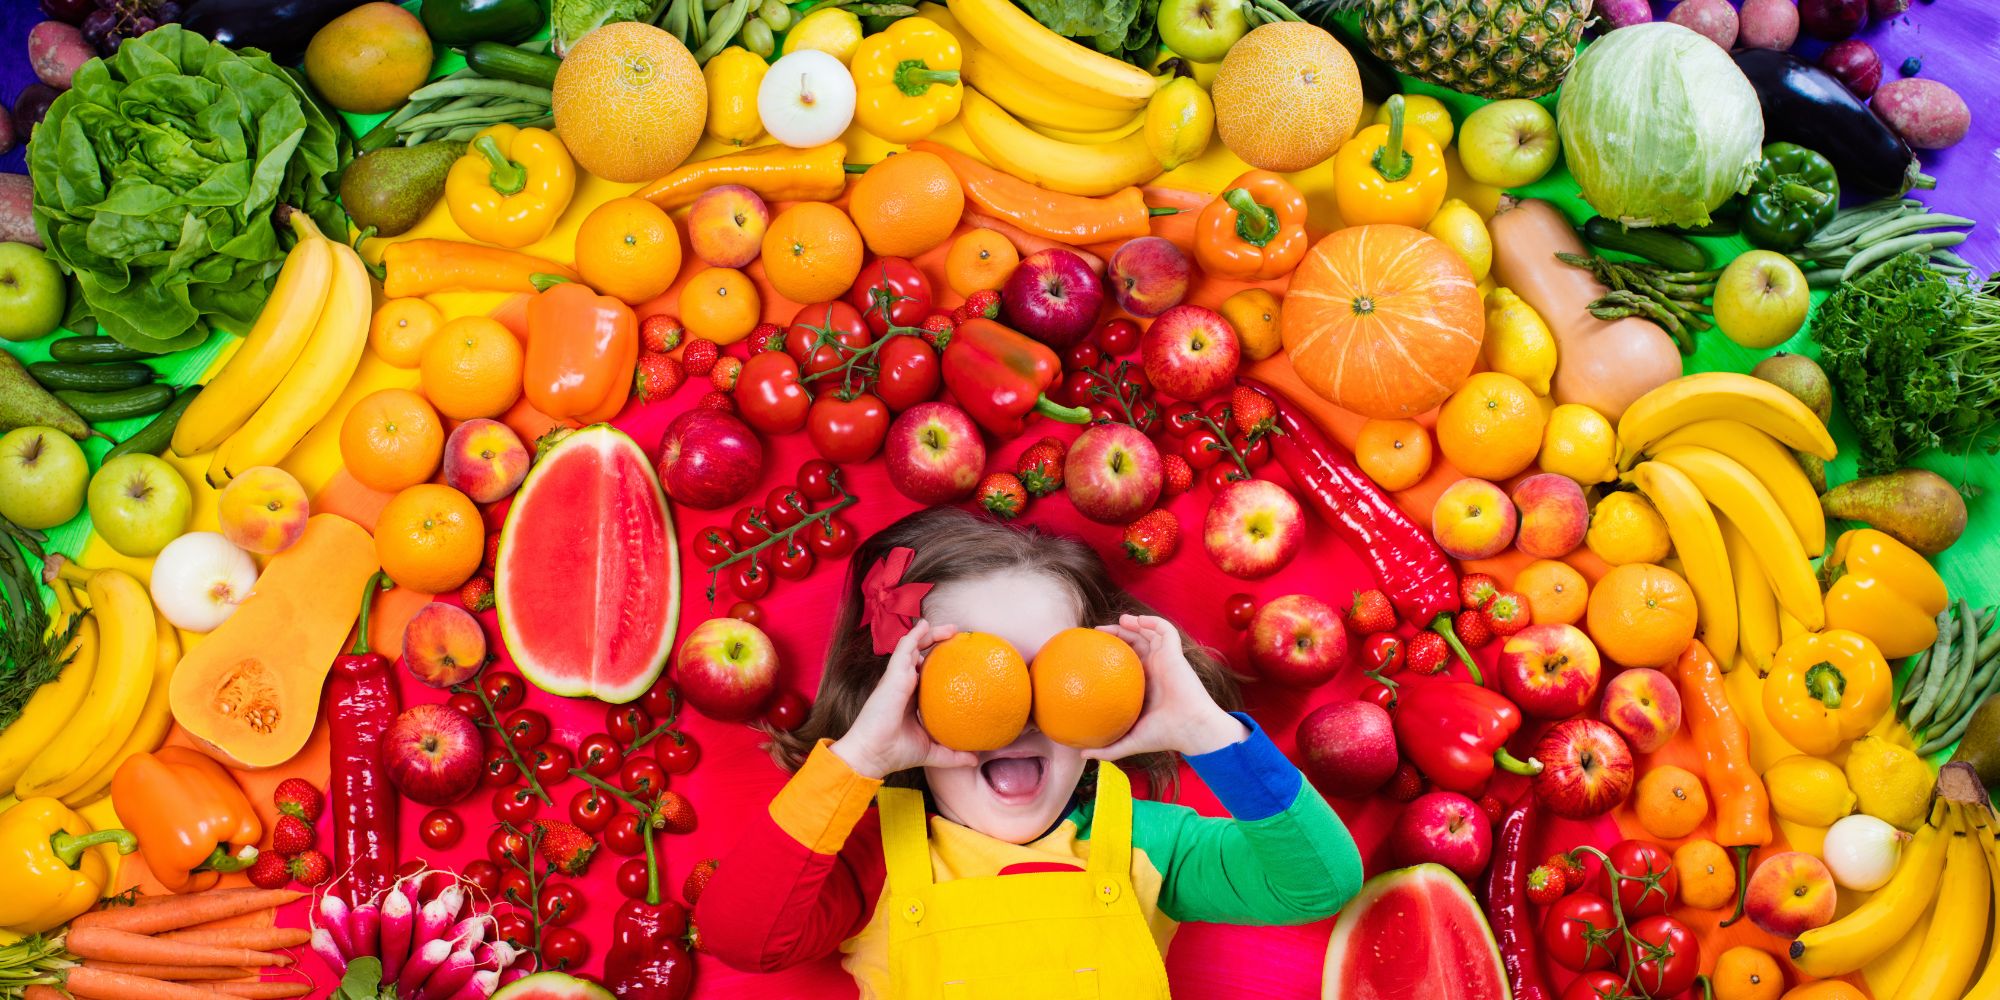 Fun and Flavorful: Creative Ways to Include More Fruits and Vegetables in Our Children's Diets